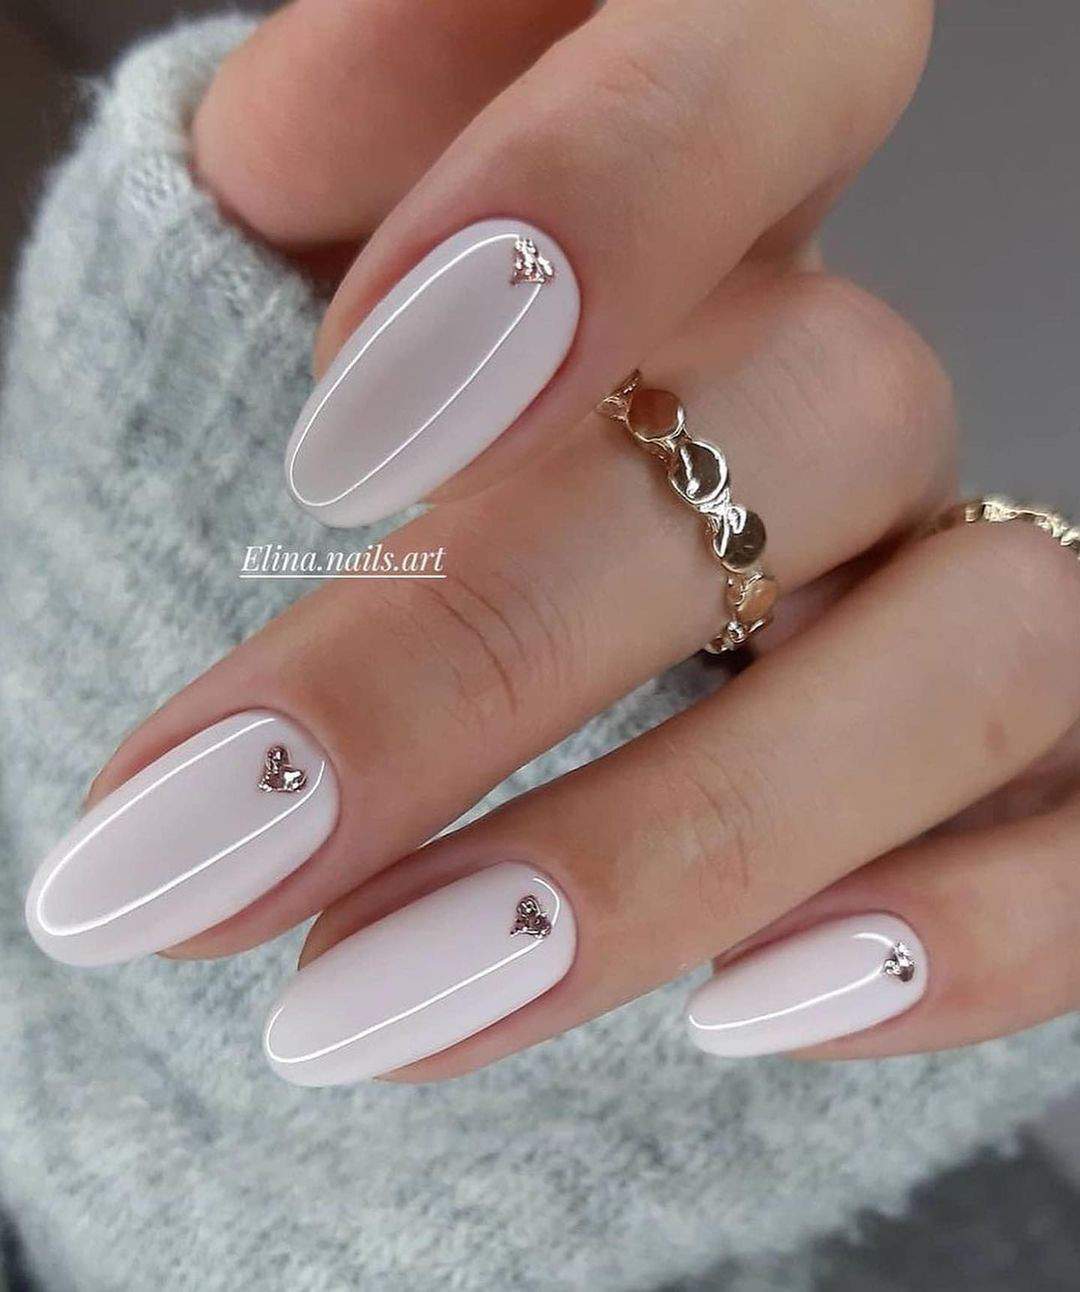 The 100+ Best Nail Designs Trends And Ideas In 2021 images 4